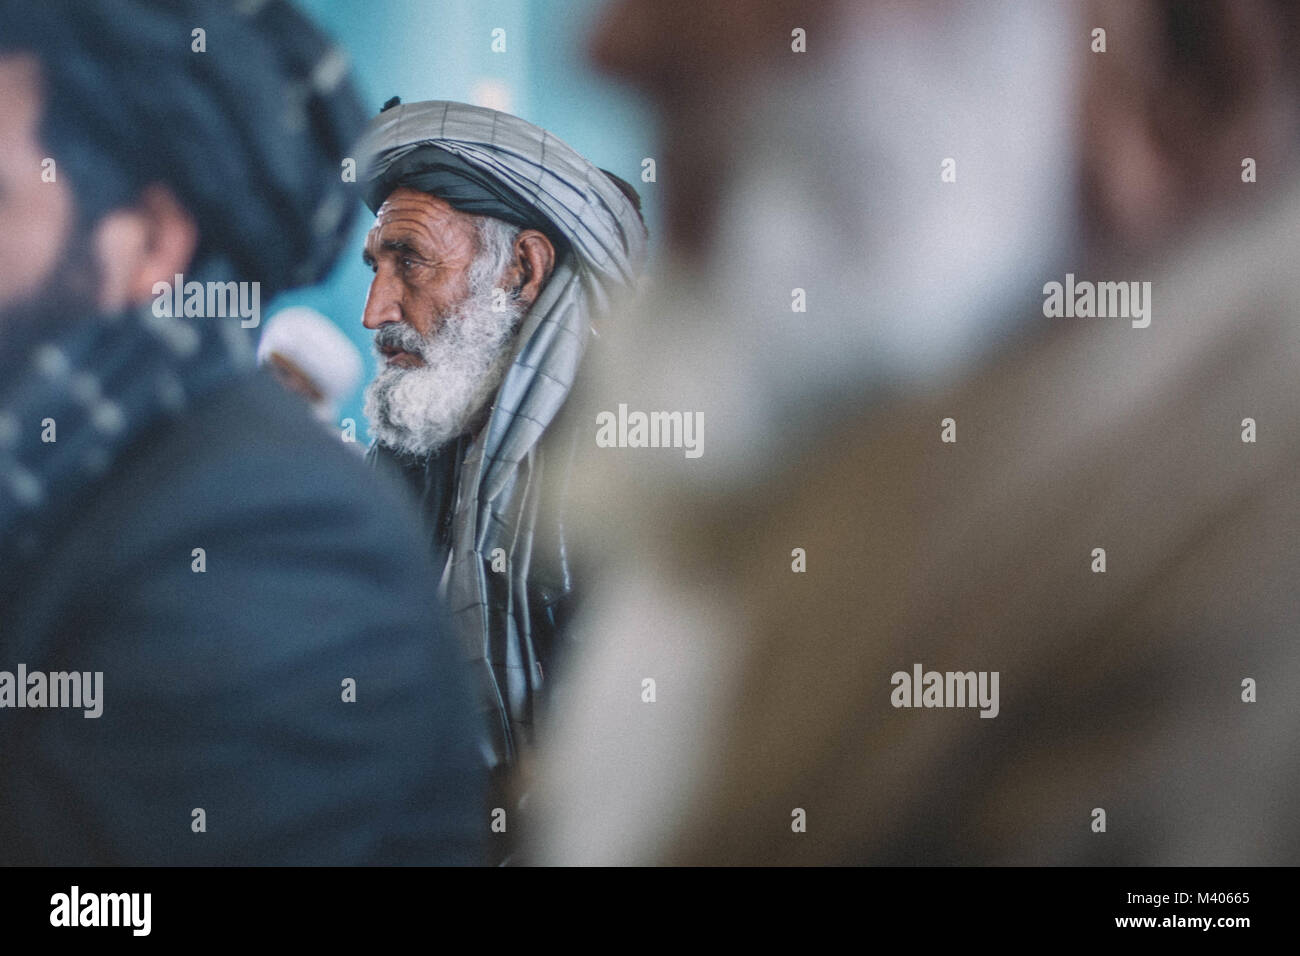 Local elders from Delaram listen during a security shura with leaders from Task Force Southwest (TFSW) and the Afghan National Defense and Security Force (ANDSF) at Camp Delaram, Afghanistan Feb. 5, 2018. Key leaders from TFSW and the ANDSF conducted a security shura to gain a greater understanding of the security situation through local elders from Nimroz province.  (U.S. Marine Corps photo by Sgt. Conner Robbins) Stock Photo